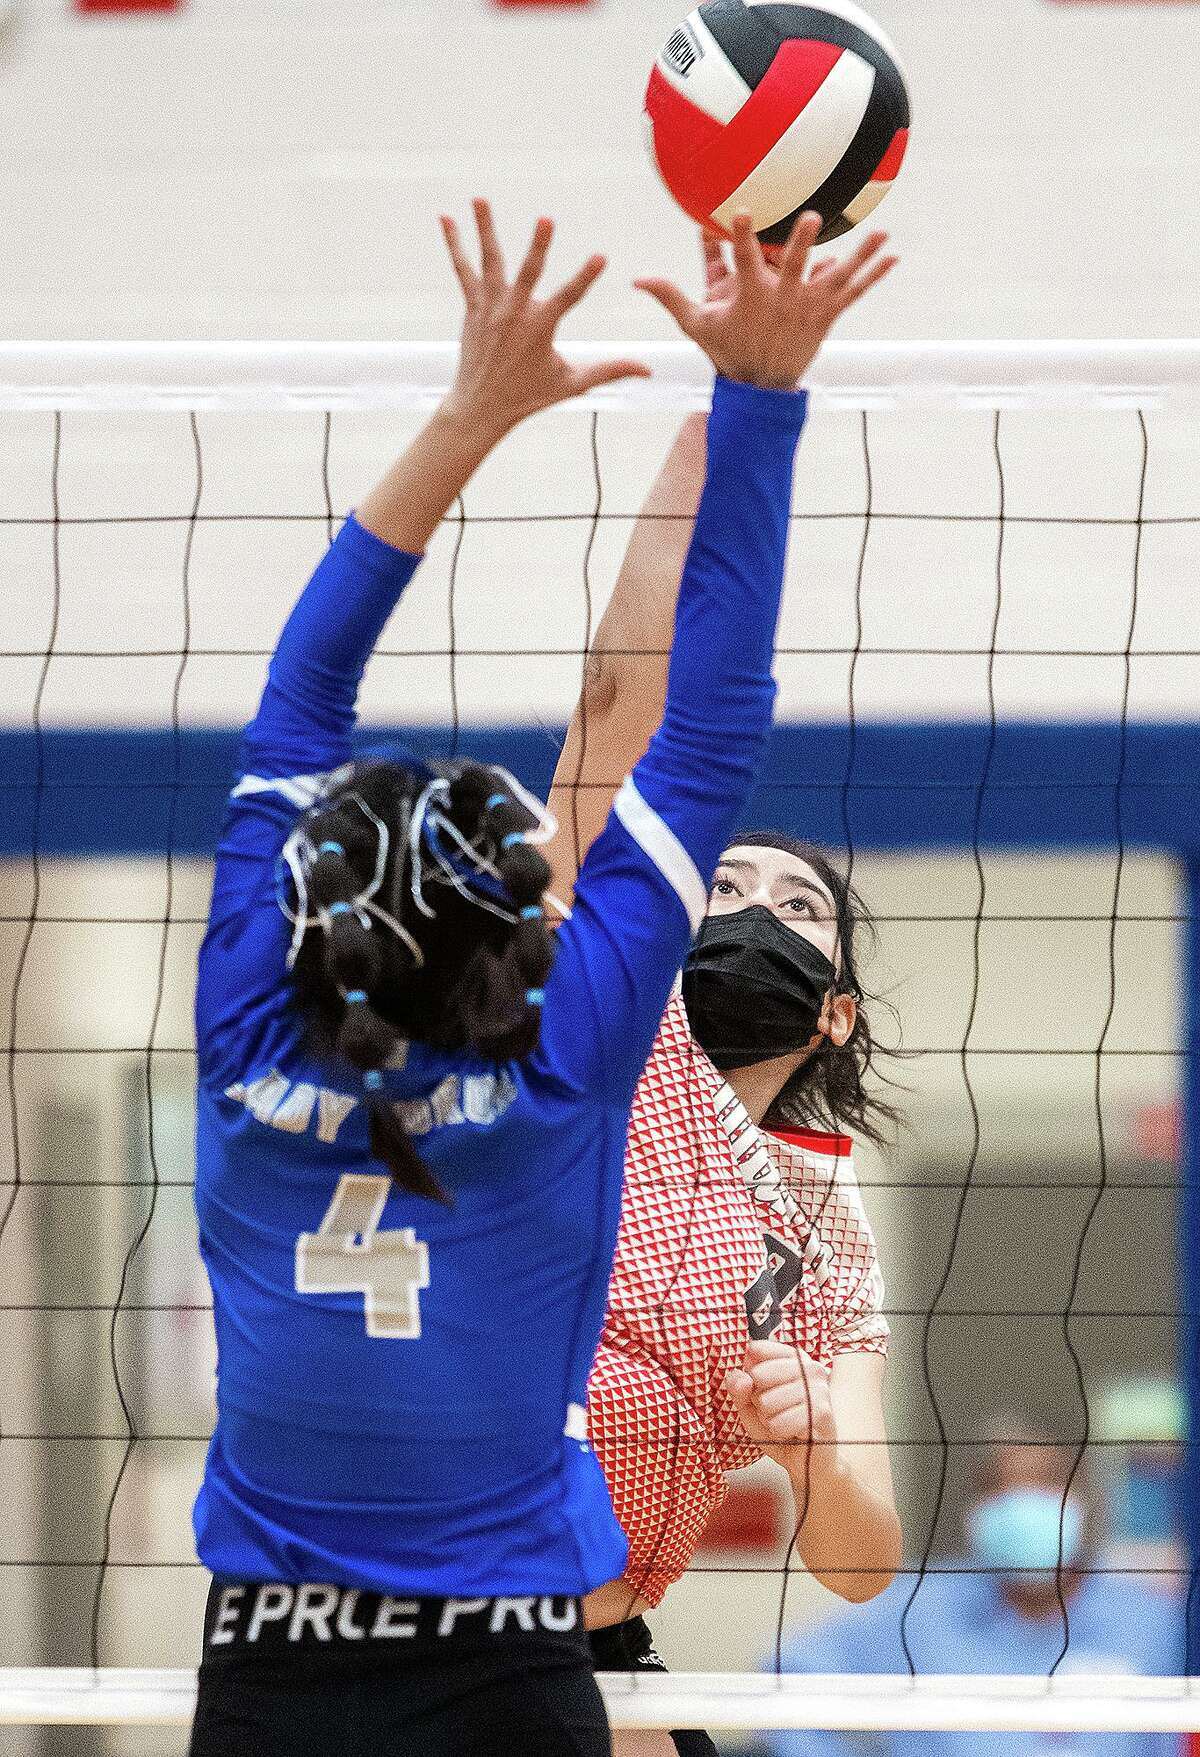 Martin High School Ivy Liendo goes up for an attack as Cigarroa High School Julie Benavides attempts to block, Tuesday, Sept. 28, 2021, at Martin High School.